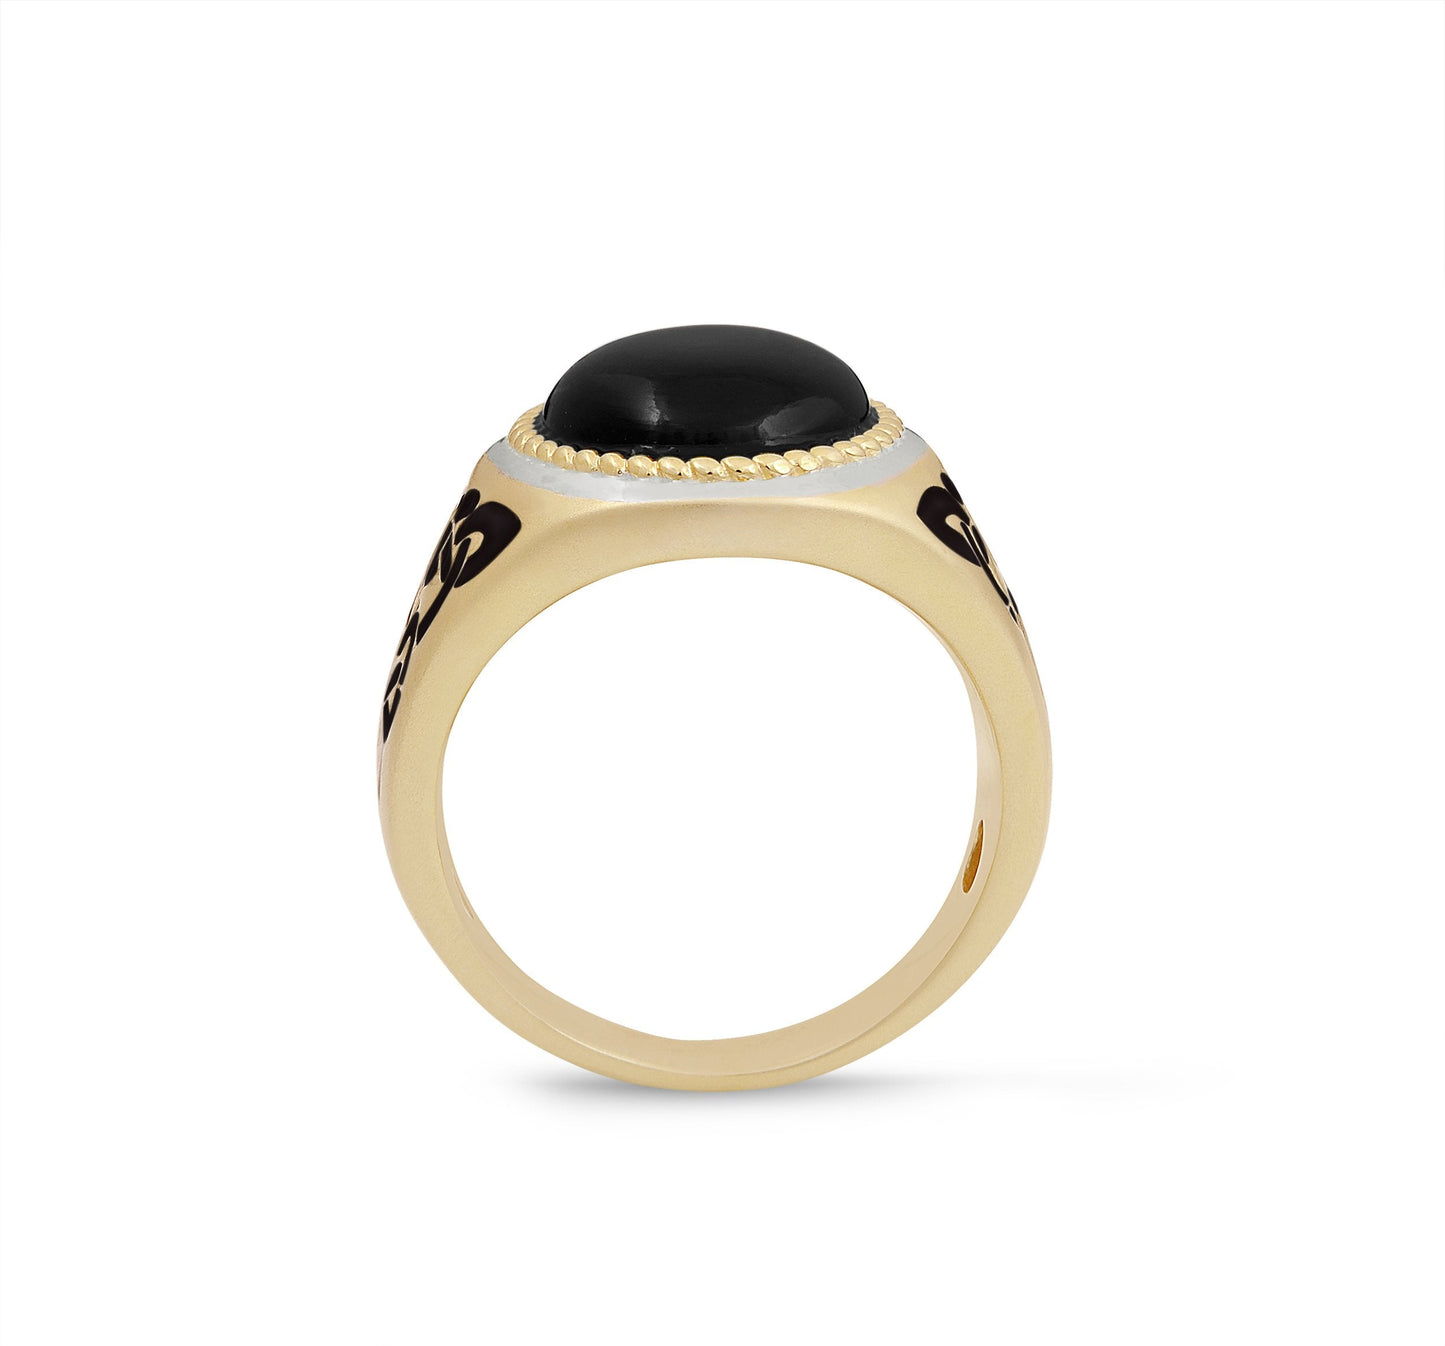 Black Onyx Stone Signet Ring in 14K Yellow Gold Plated Sterling Silver with Enamel by LuvMyJewelry